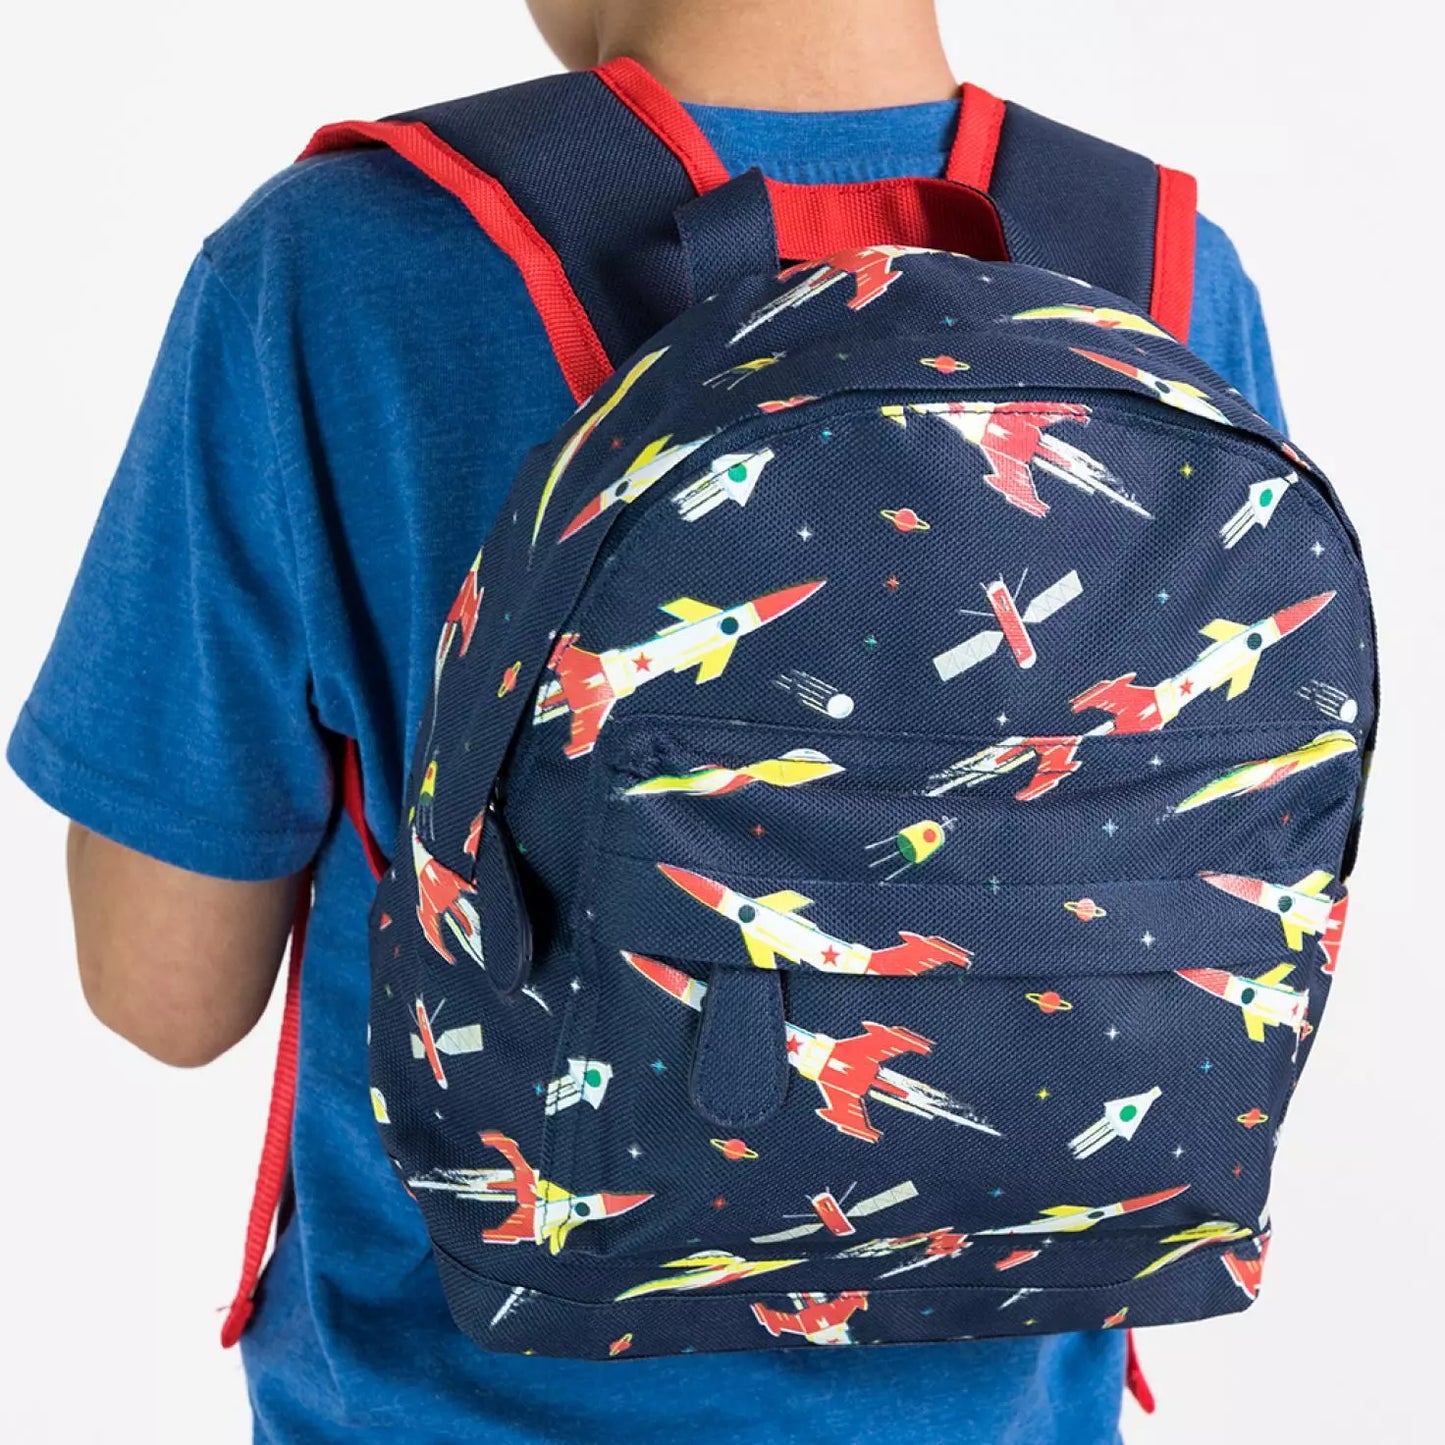 A childs backpack by Rex London, style Space Age, in blue with multi rocket print, two compartments and zip fastenings. Lifestyle image.